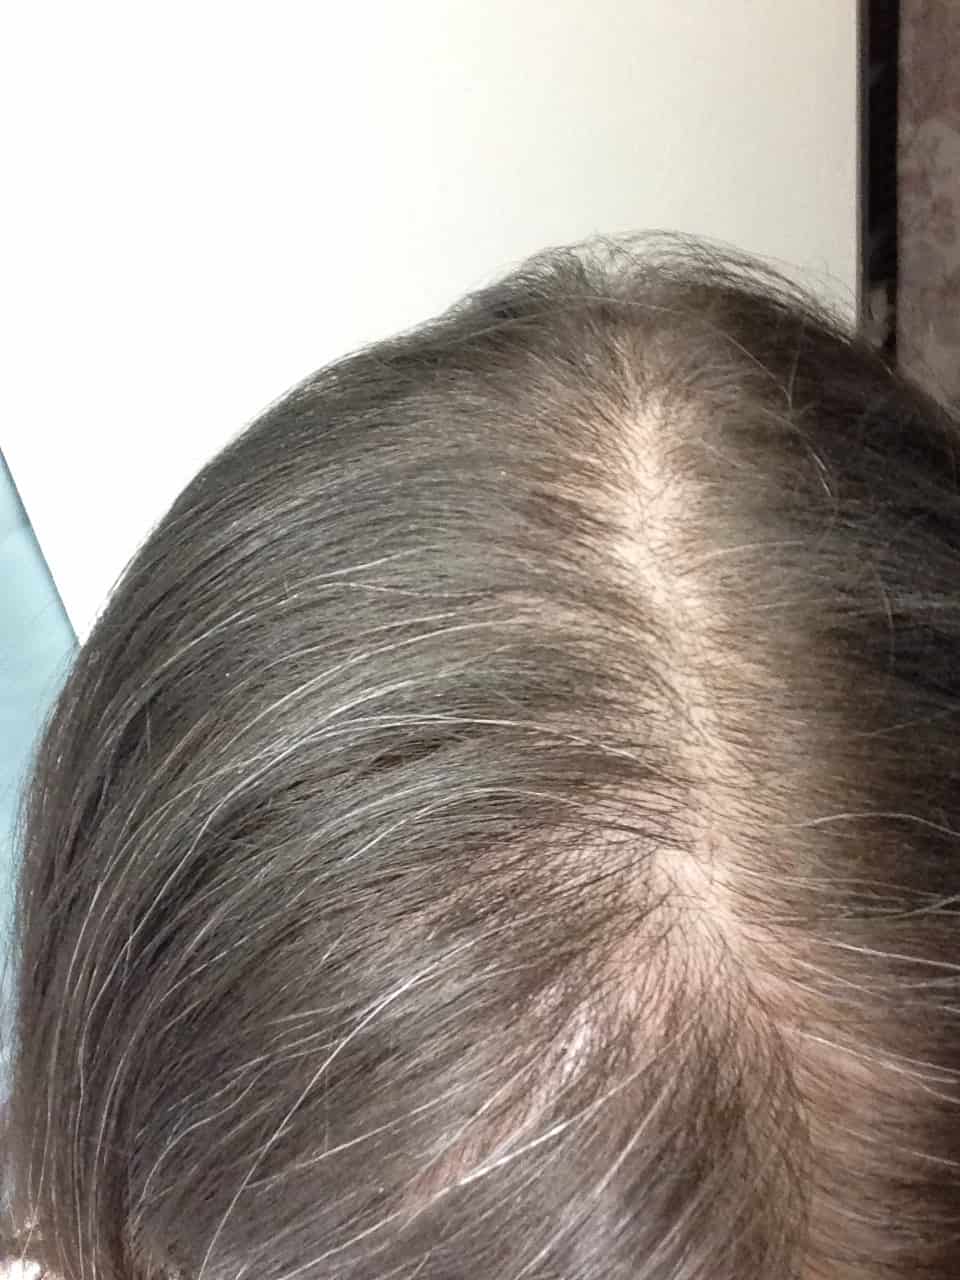 This was my hair in 2014 prior to my diagnosis with an autoimmune disease. I can see the hair loss pattern now, but at the time I didn't know what to look for! | via Autumn All Along